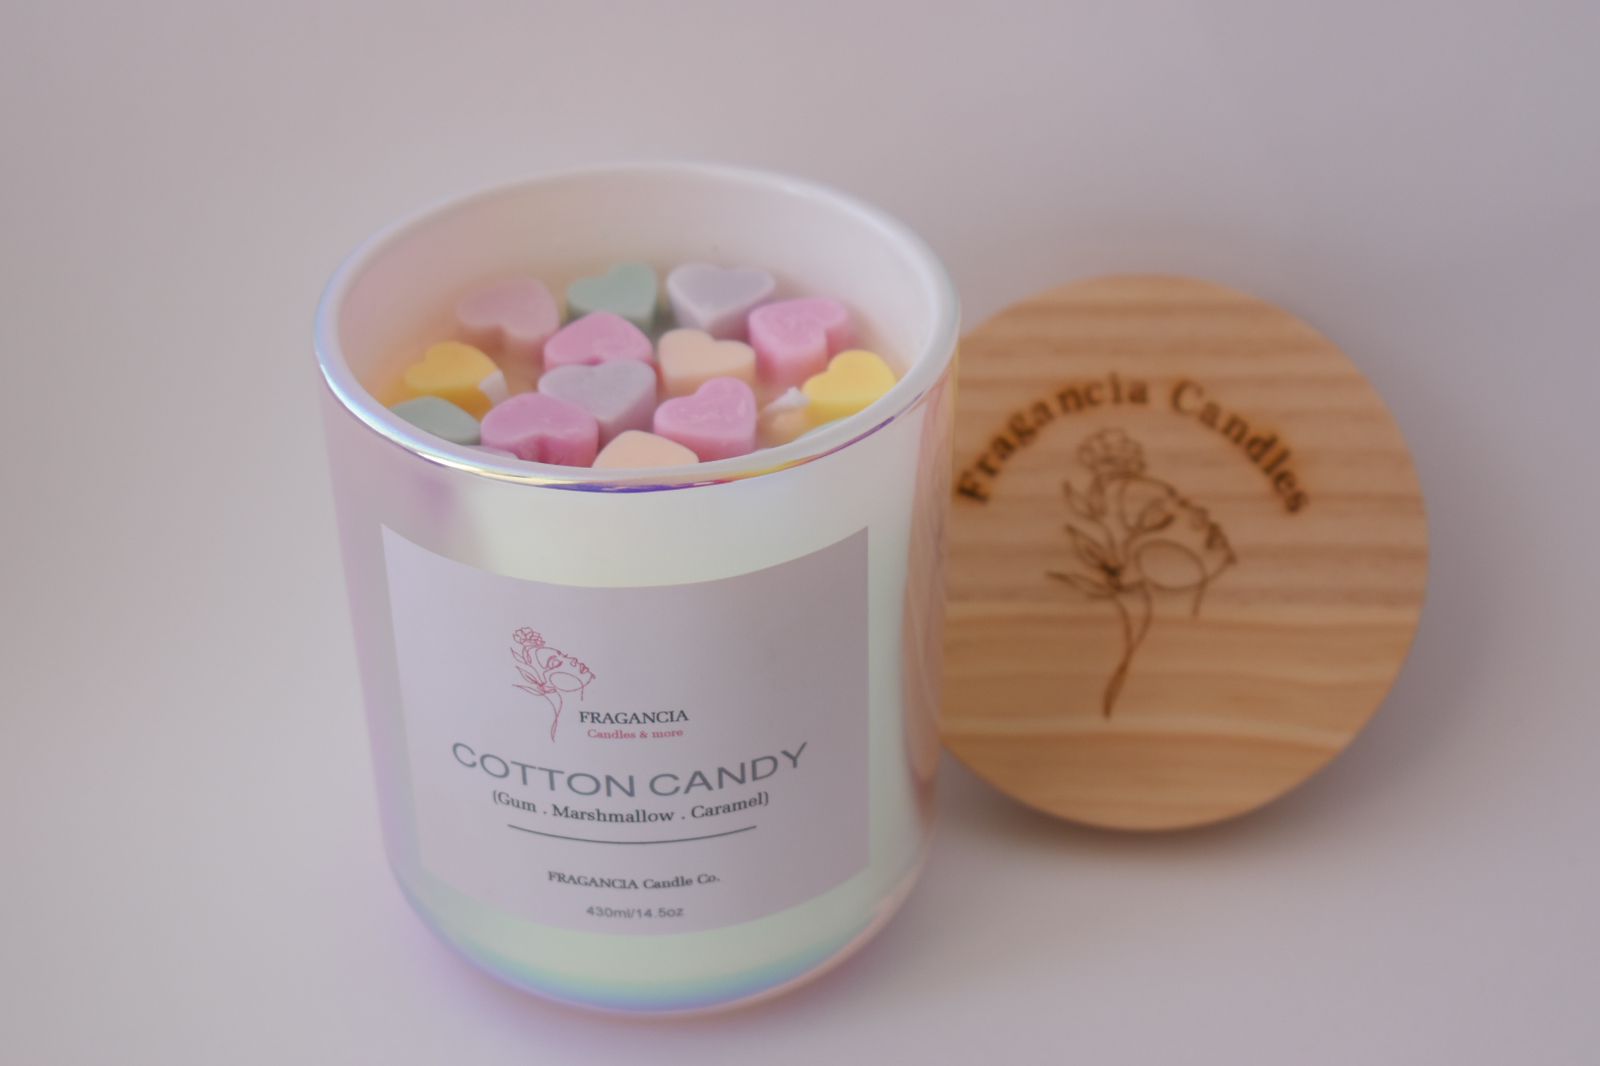 Fragancia COTTON CANDY luxury hand-poured natural soy wax candle in an  iridescent jar - Jordan Crafts